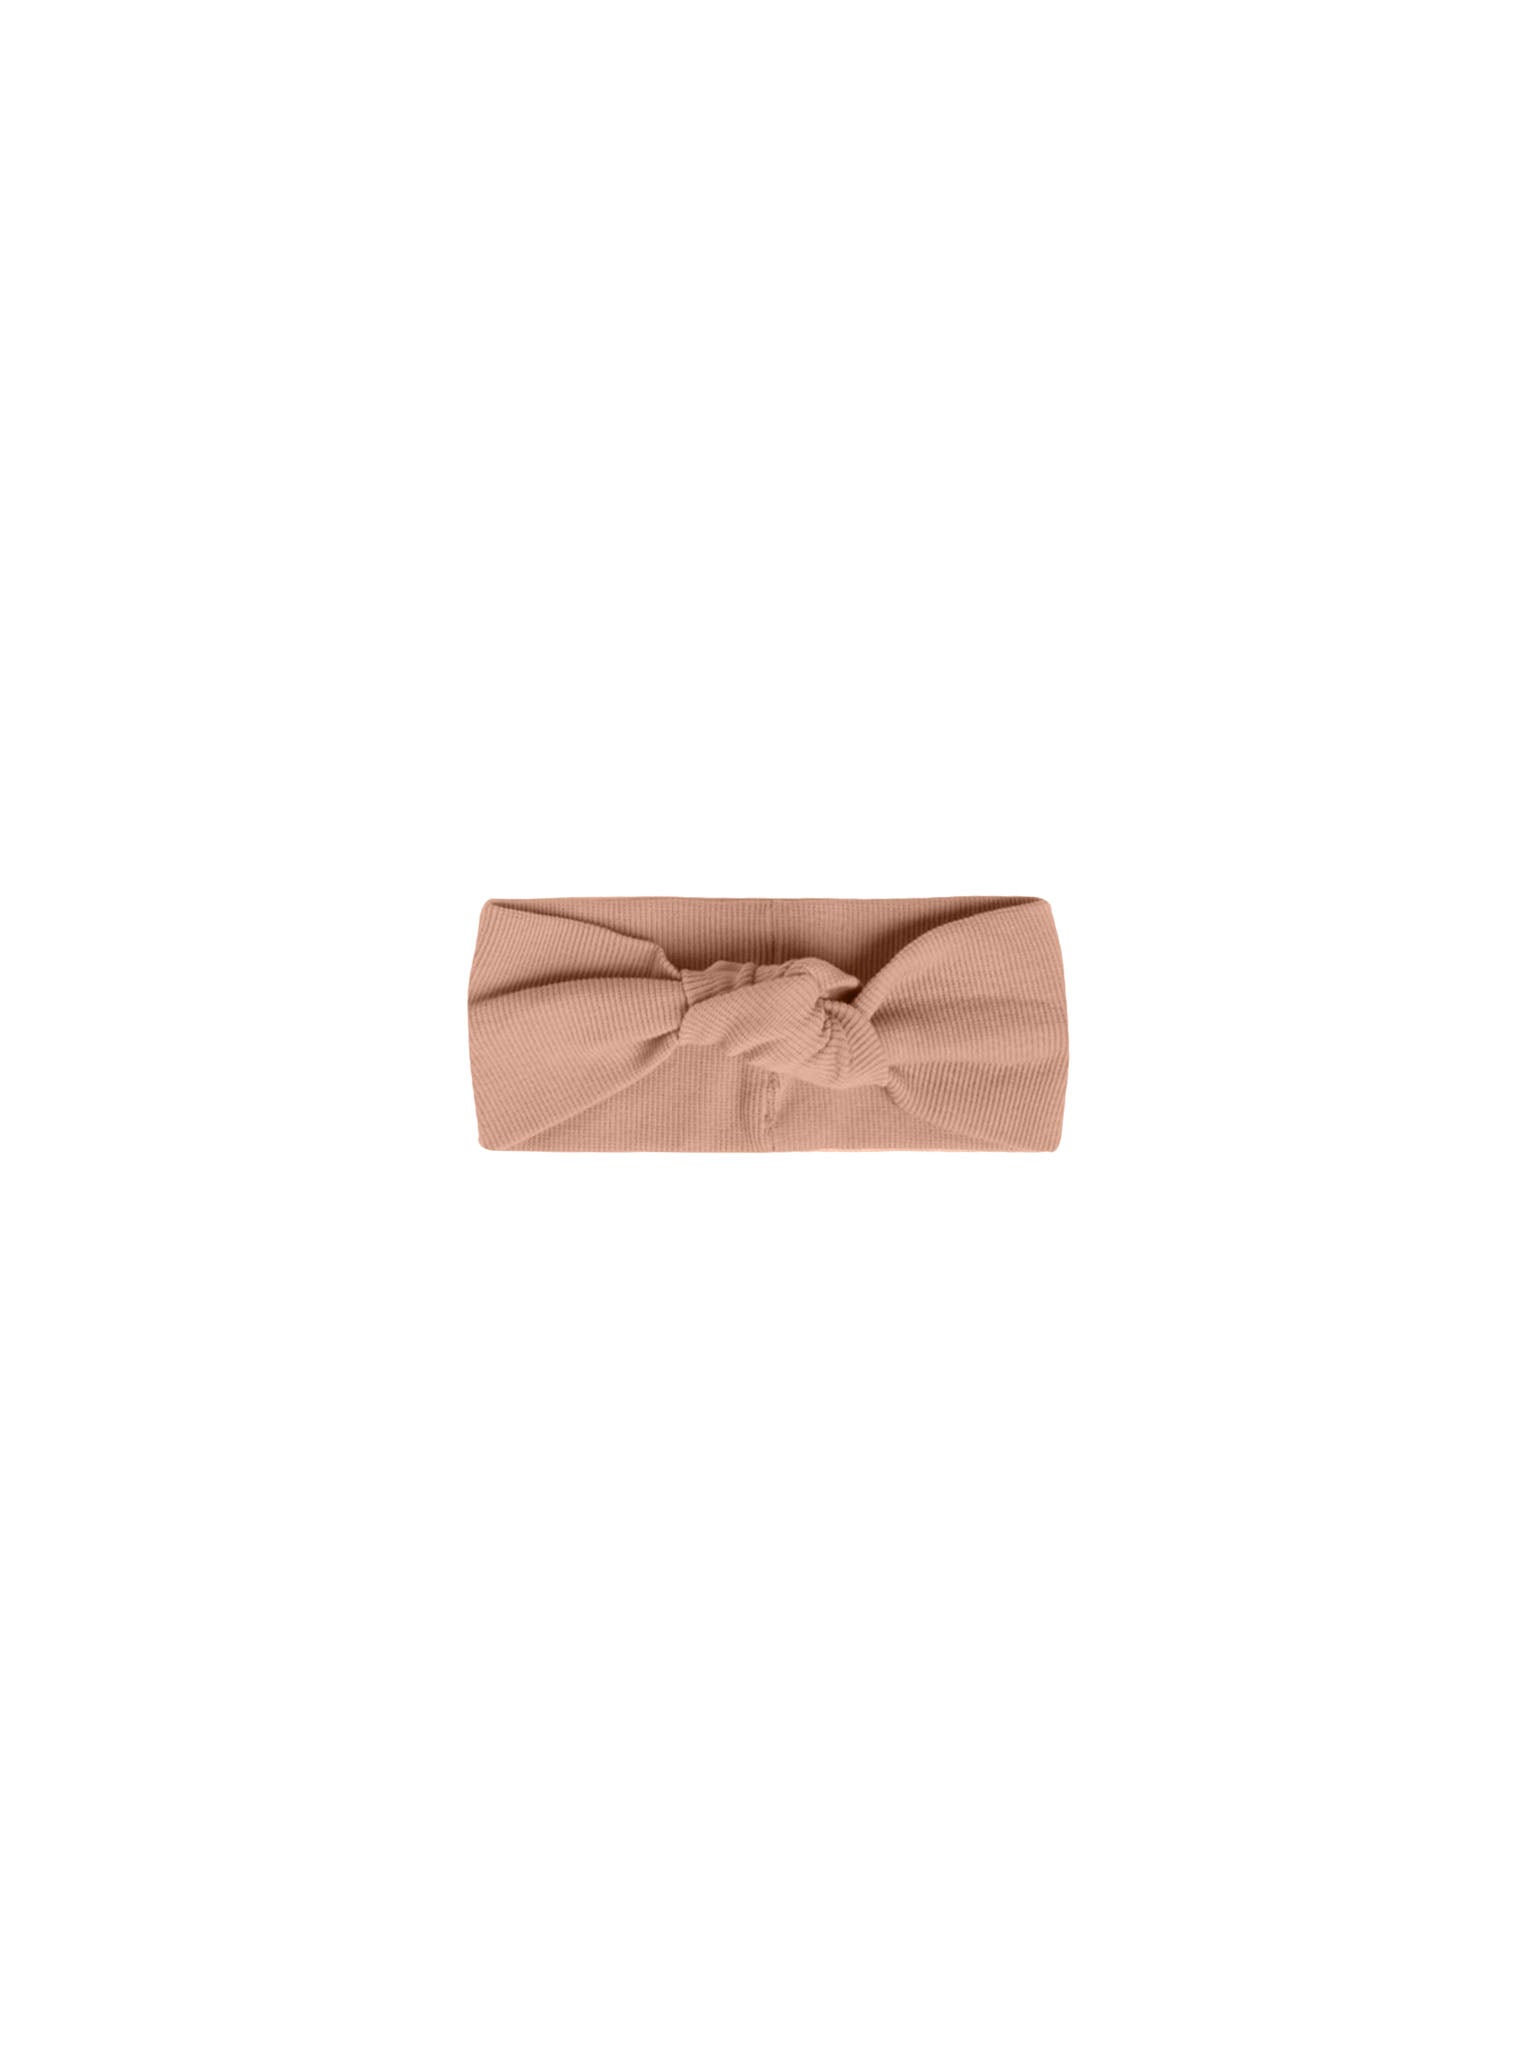 QUINCY MAE KNOTTED HEADBAND / RIBBED ROSE